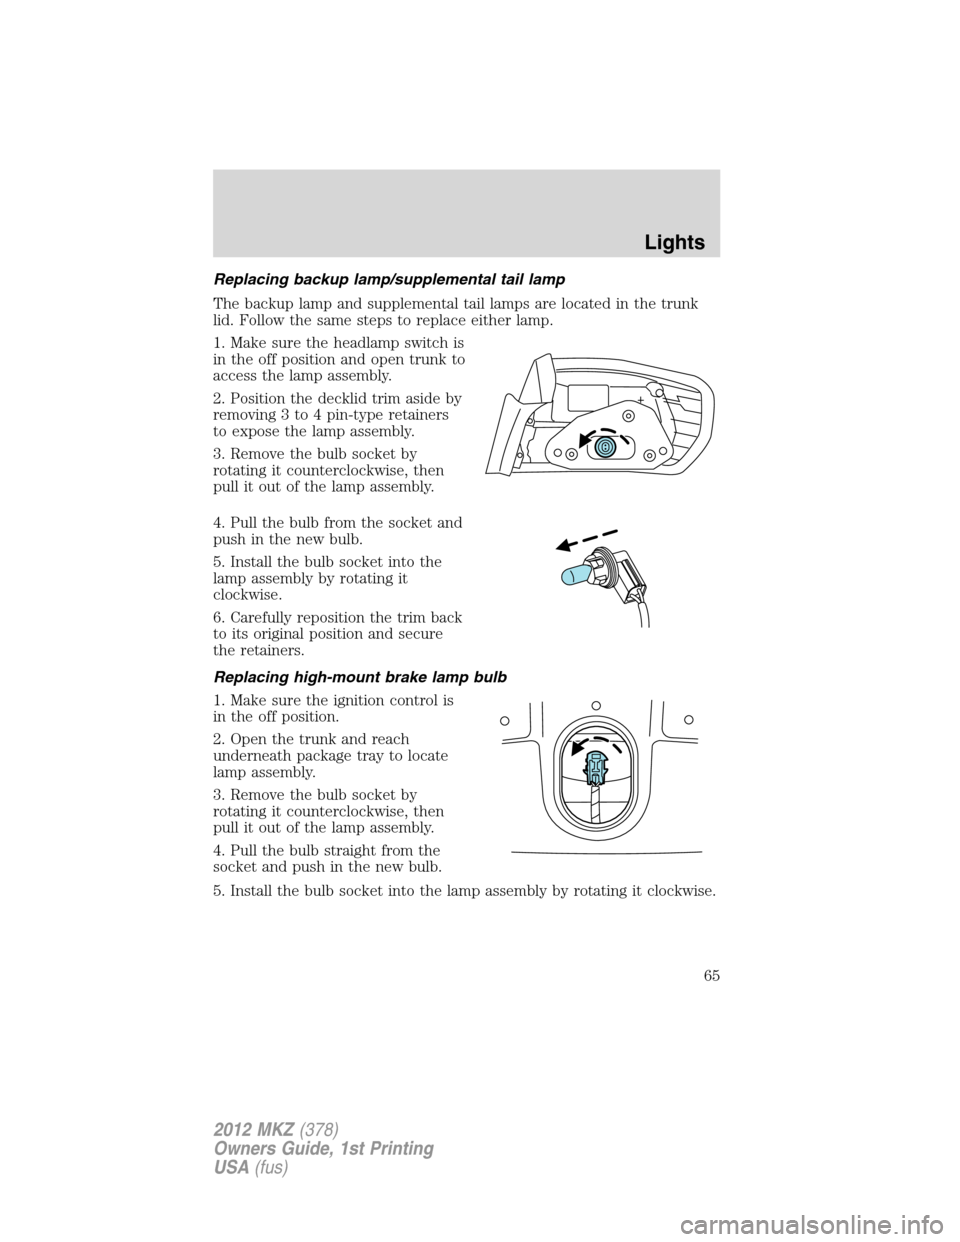 LINCOLN MKZ 2012 Repair Manual Replacing backup lamp/supplemental tail lamp
The backup lamp and supplemental tail lamps are located in the trunk
lid. Follow the same steps to replace either lamp.
1. Make sure the headlamp switch is